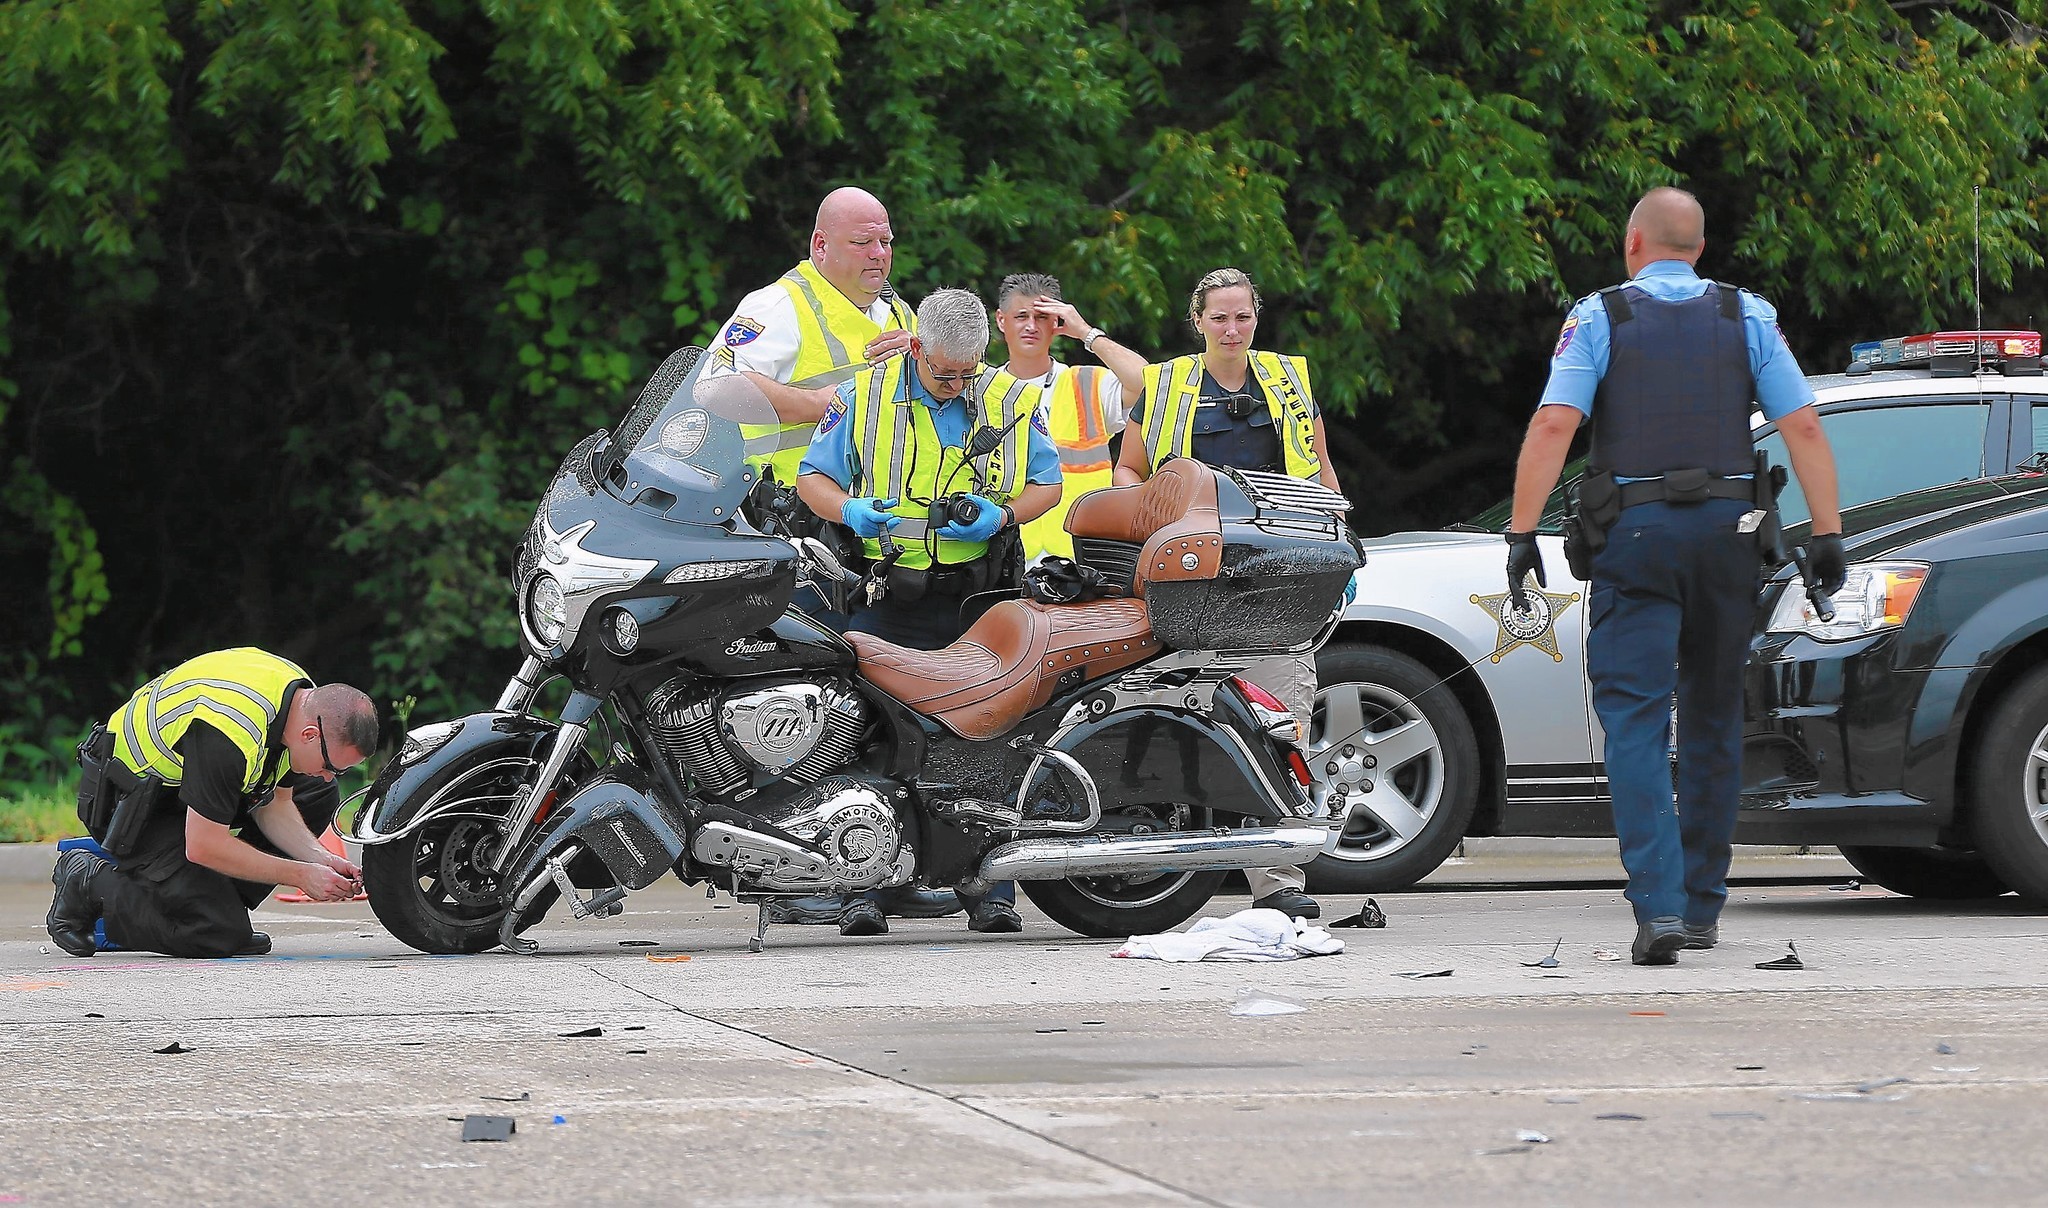 motorcycle accident alabama - Motorcycle Accident Injury Lawyers - Smith Law Firm